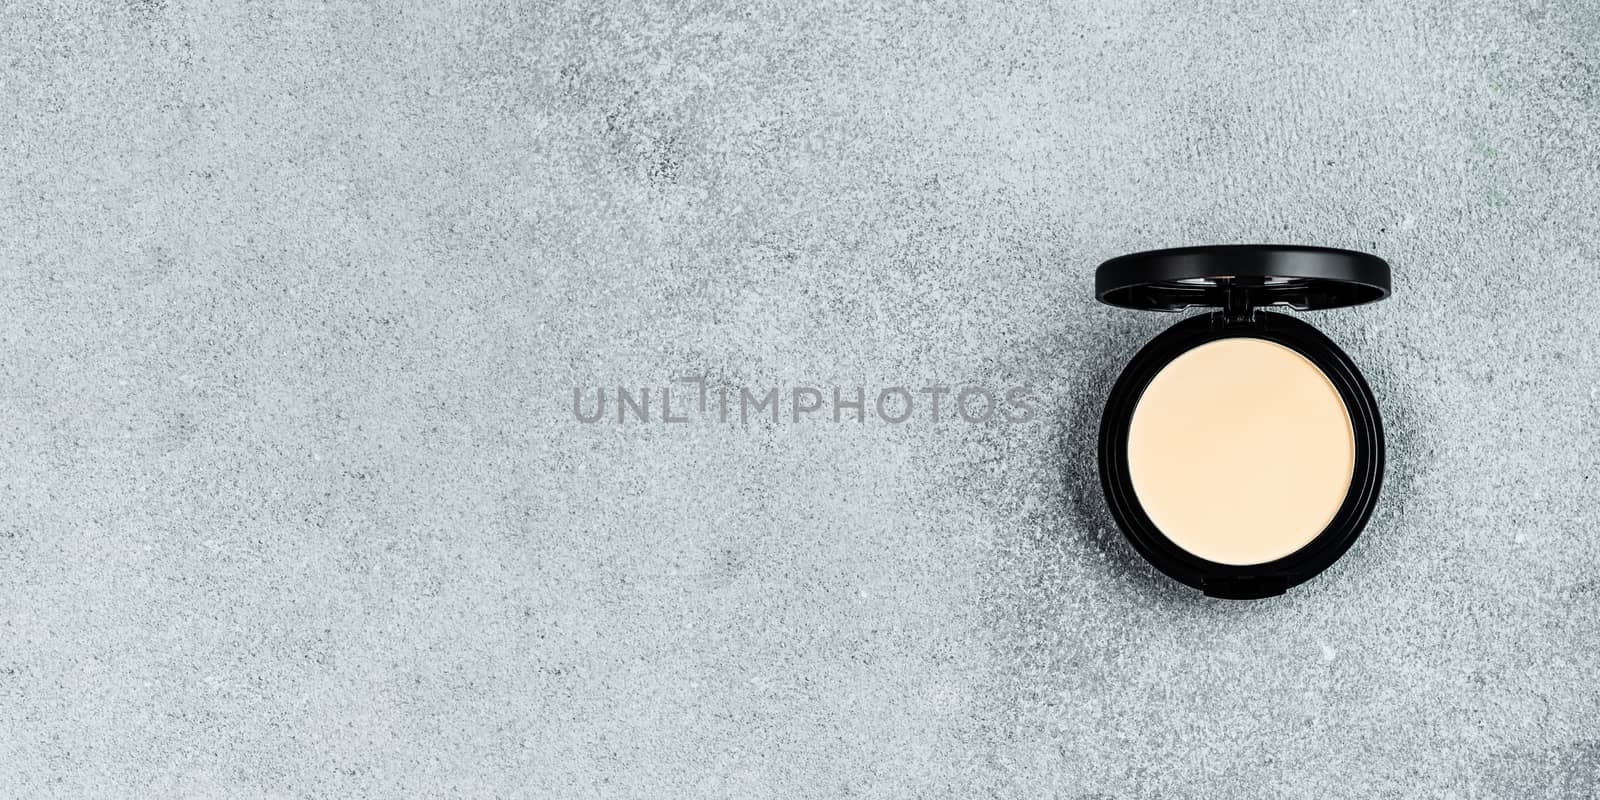 Compact powder on gray cement background. Female pressed powder in opened black plastic case with mirror, copy space for text or design. Top view or flat lay. Long horizontal banner